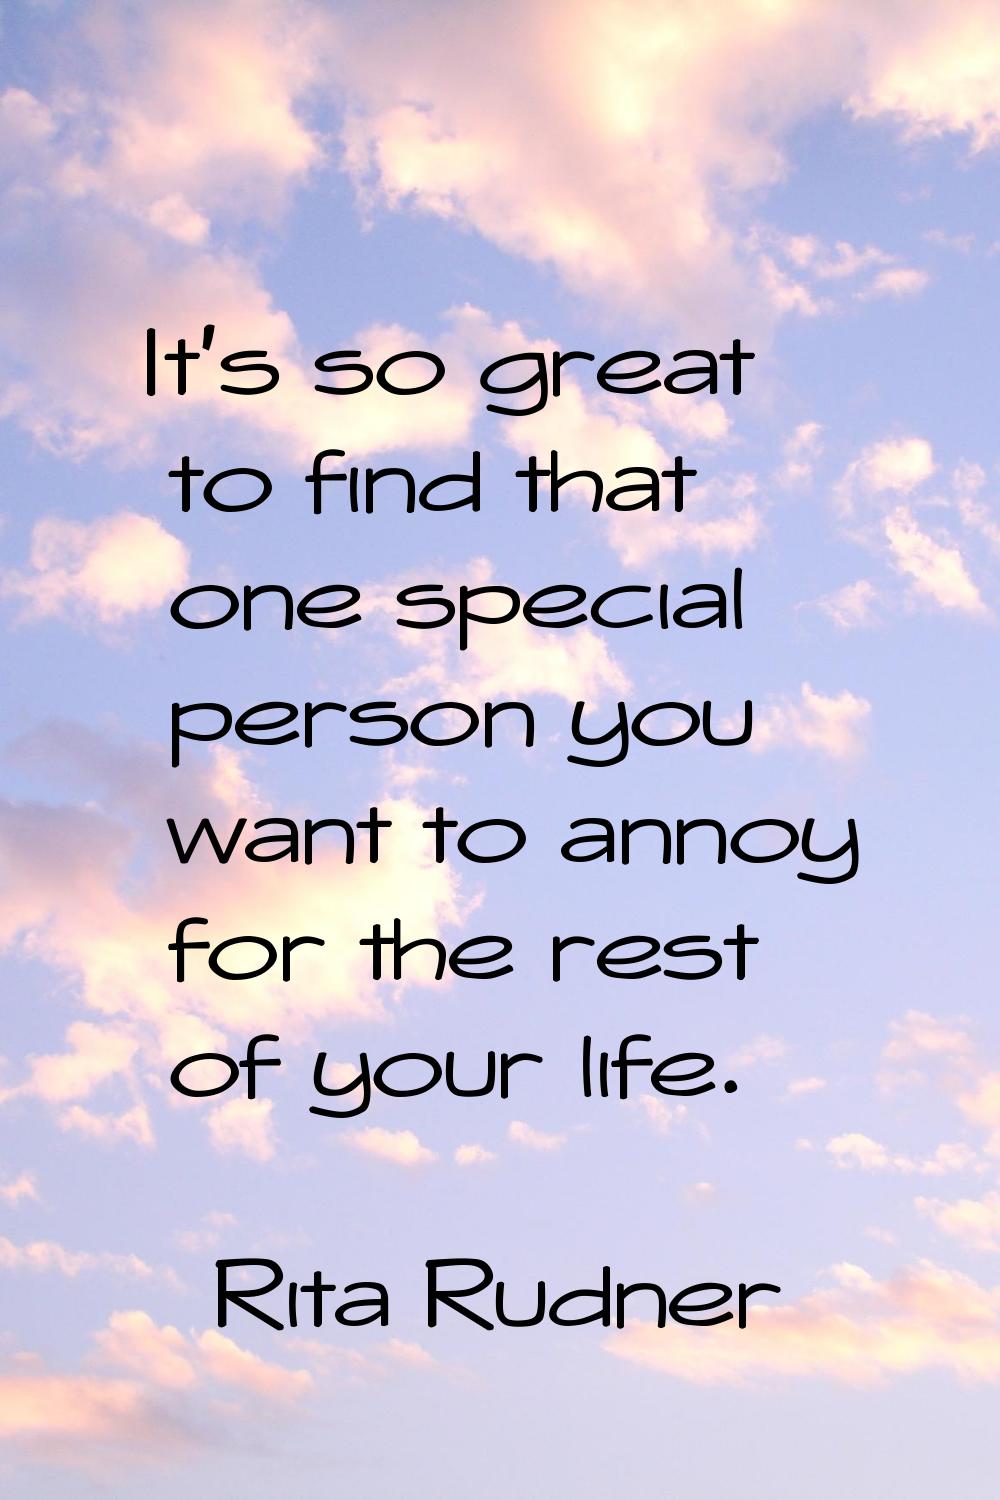 It's so great to find that one special person you want to annoy for the rest of your life.